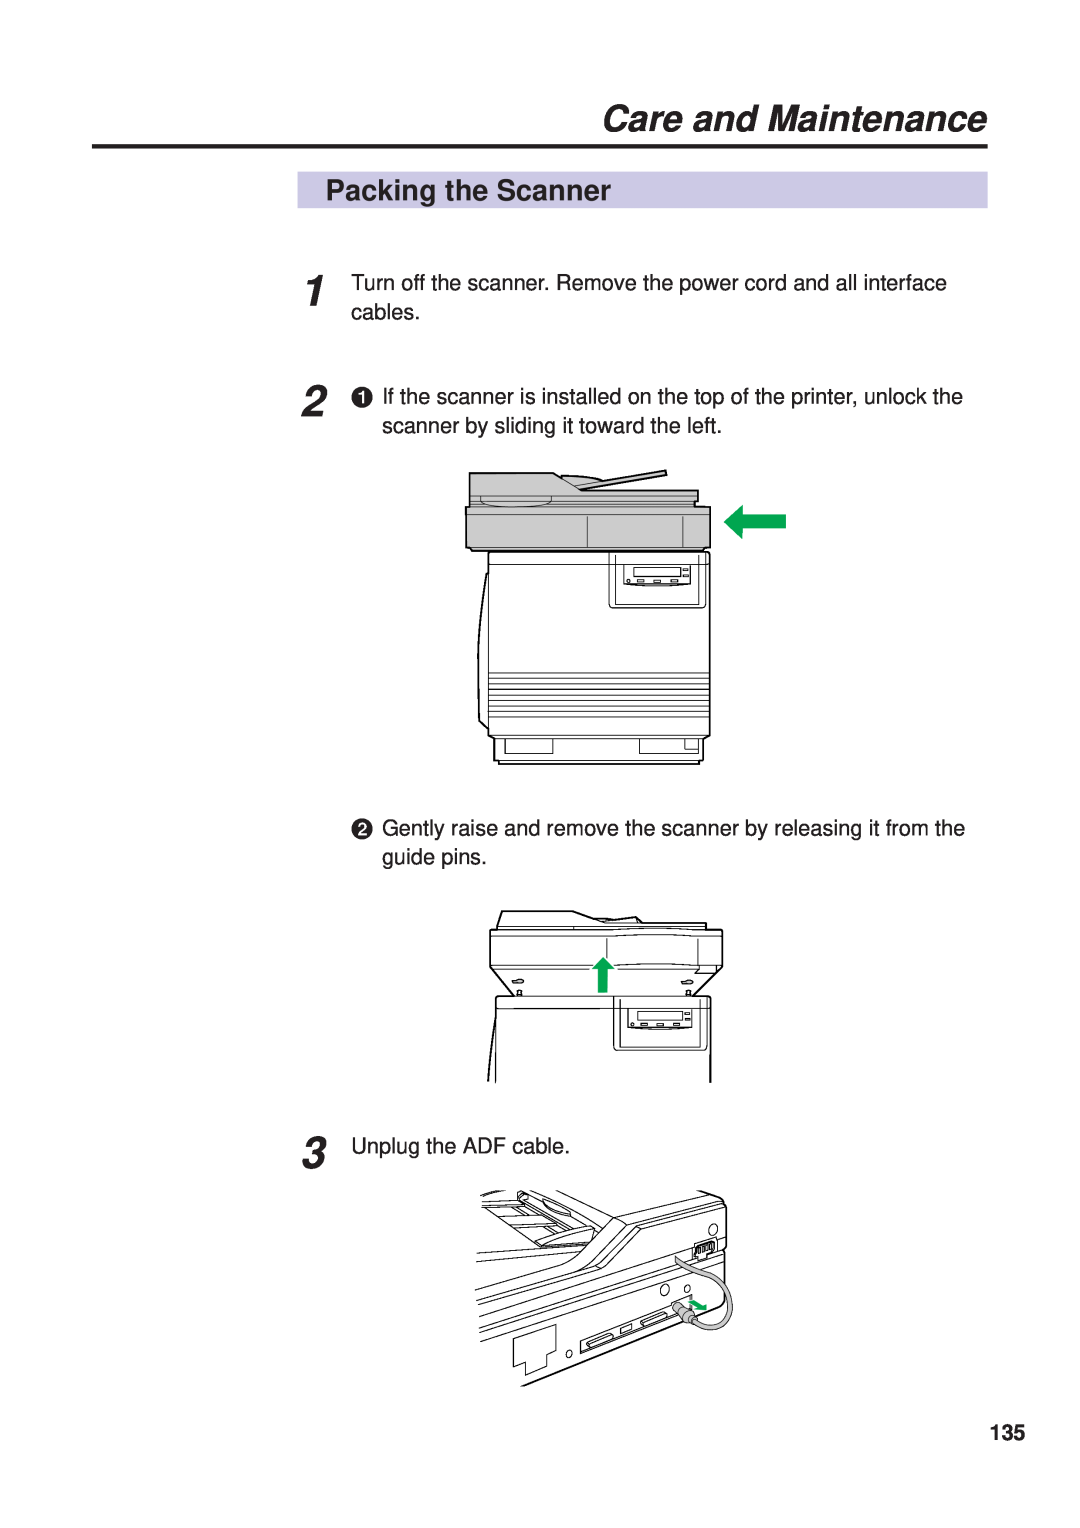 Panasonic KX-PS8000 manual Packing the Scanner, Turn off the scanner. Remove the power cord and all interface, cables 